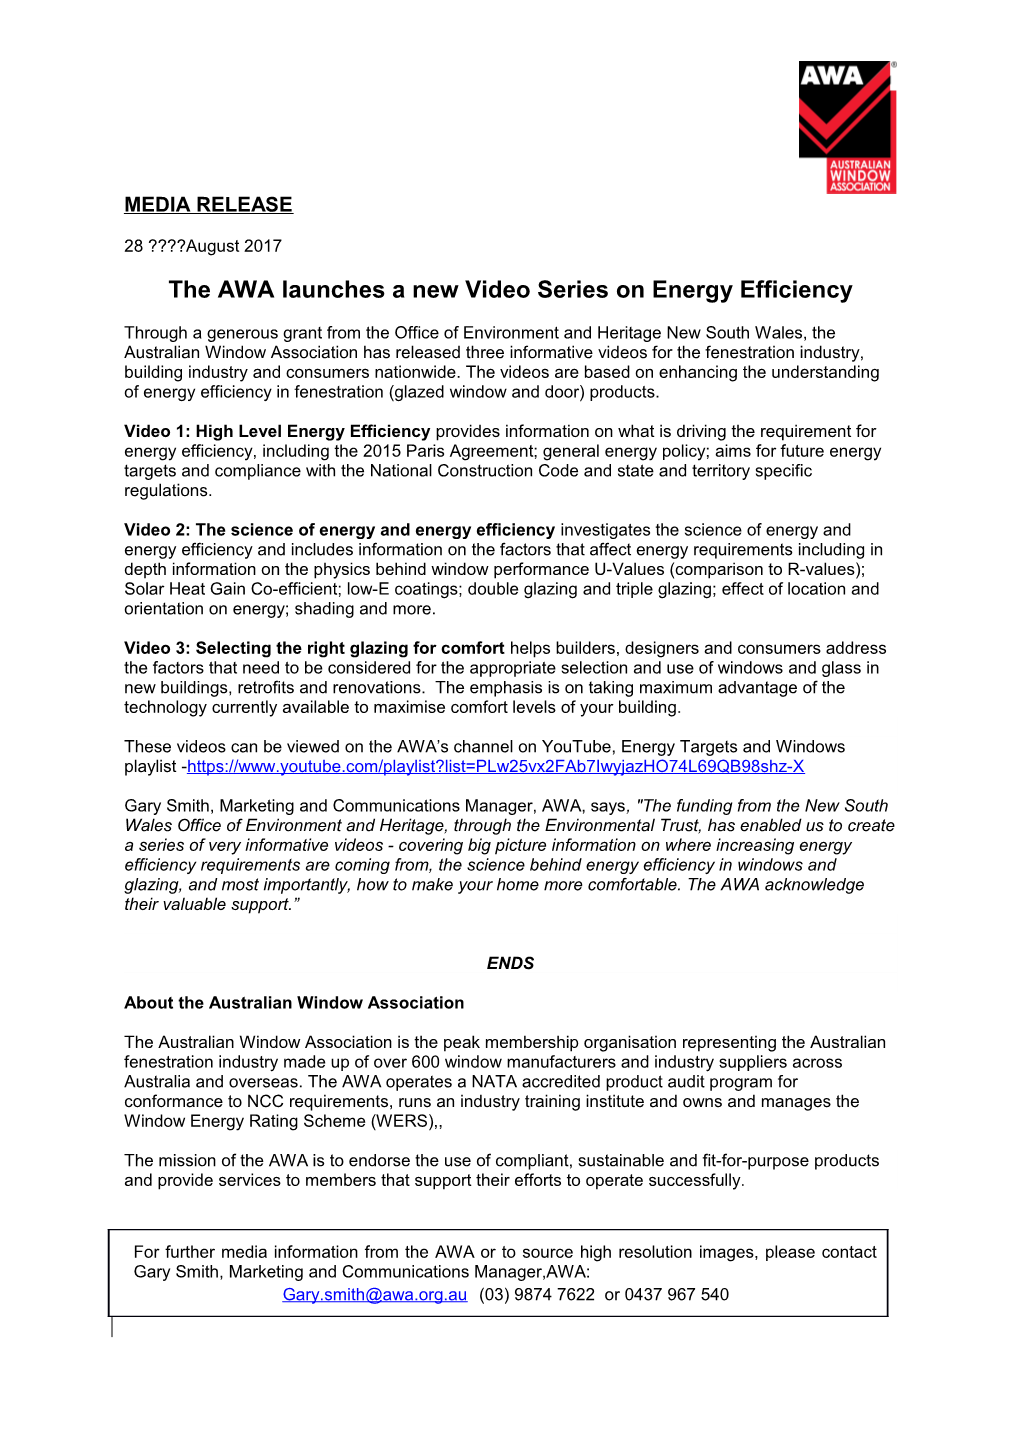 The Awalaunches a New Video Series on Energyefficiency